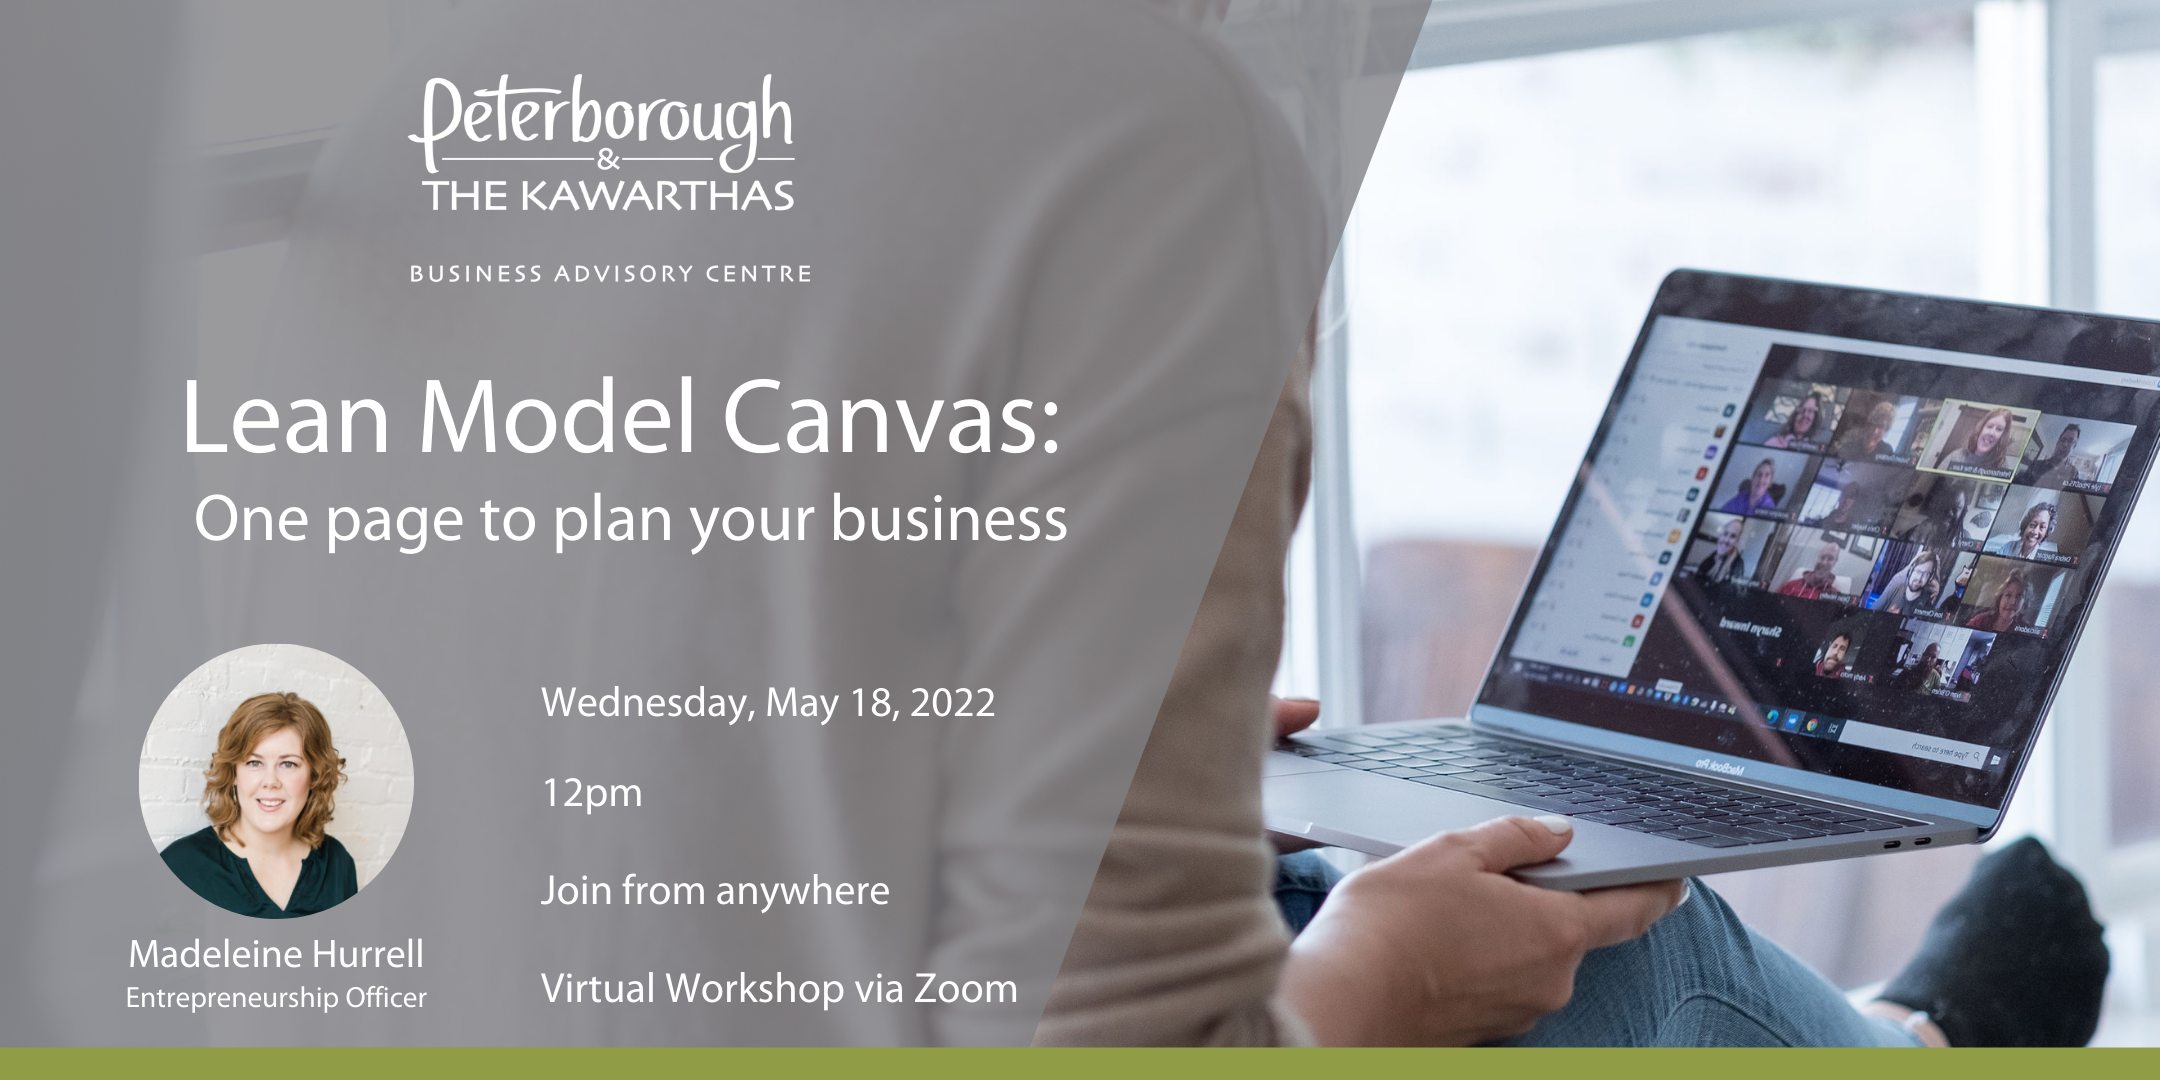 Peterborough & the Kawarthas Business Advisory Centre Lean Model Canvas: One page to plan your business, Wednesday, May 18, 2022 12pm Join from anywhere, Virtual Workshop via Zoom, hosted by Madeleine Hurrell, Entrepreneurship Officer